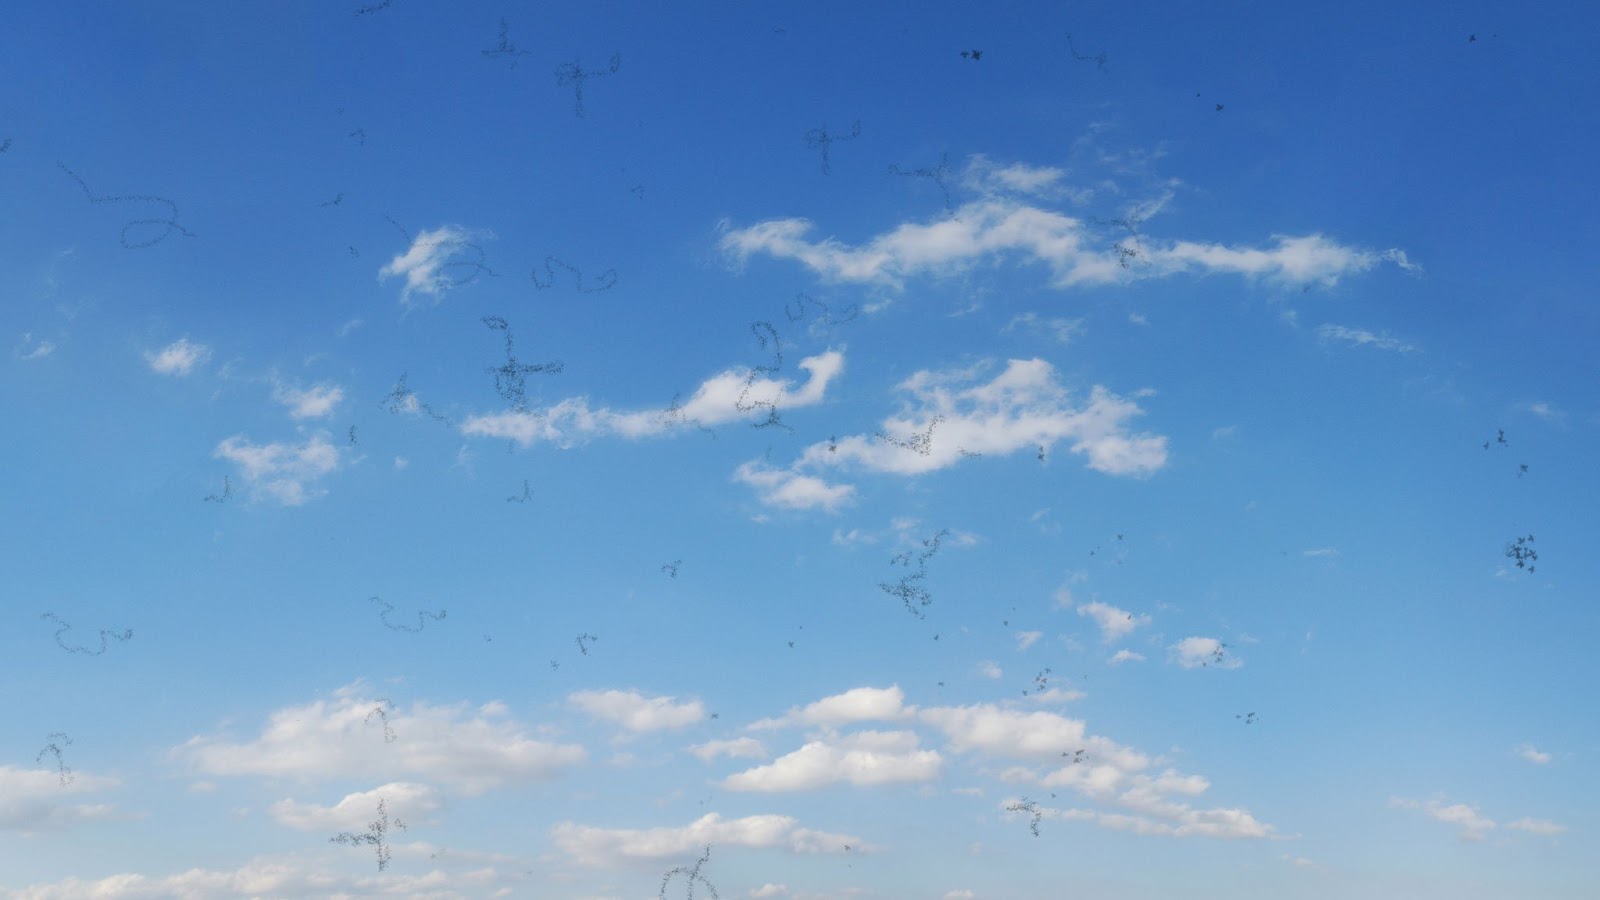 Floaters overlaid over a photo of the sky and clouds.